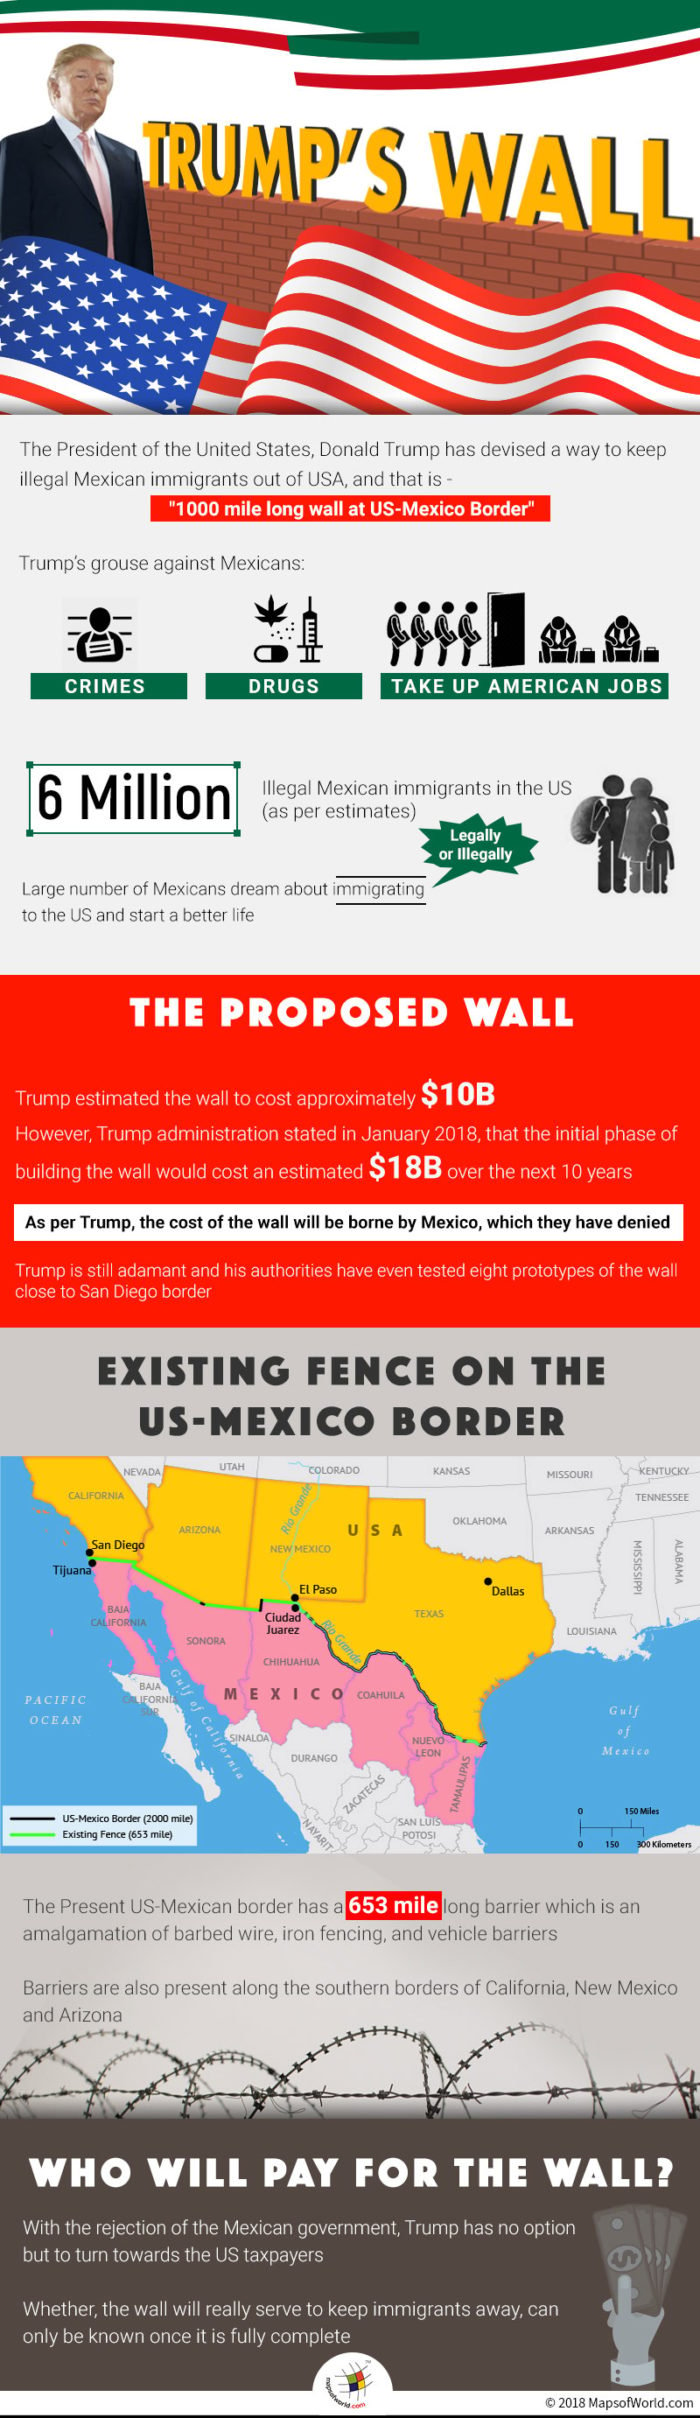 Infographic elaborating details of Trump Wall